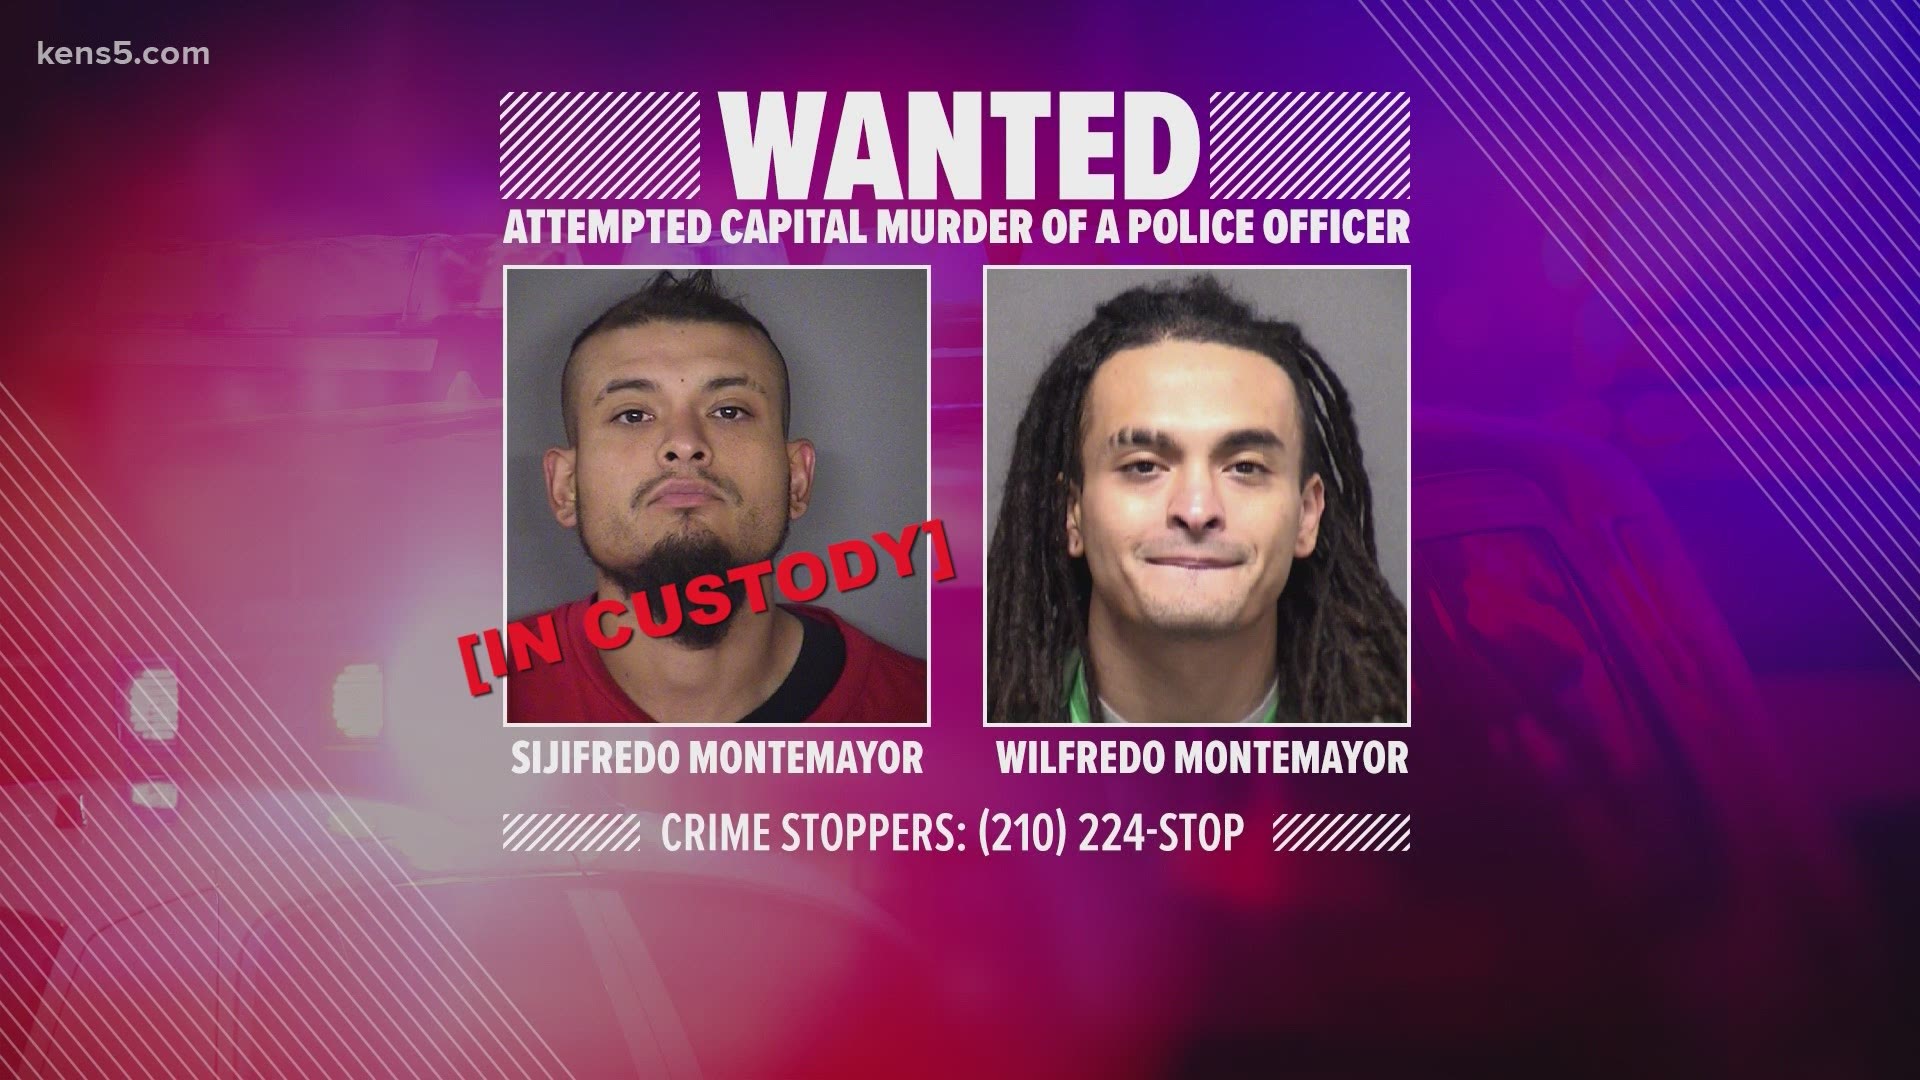 BCSO said they are working to extradite Sijifredo Montemayor. They said his brother Wilifredo shot Sergeant Joey Sepulveda, and is armed and dangerous.